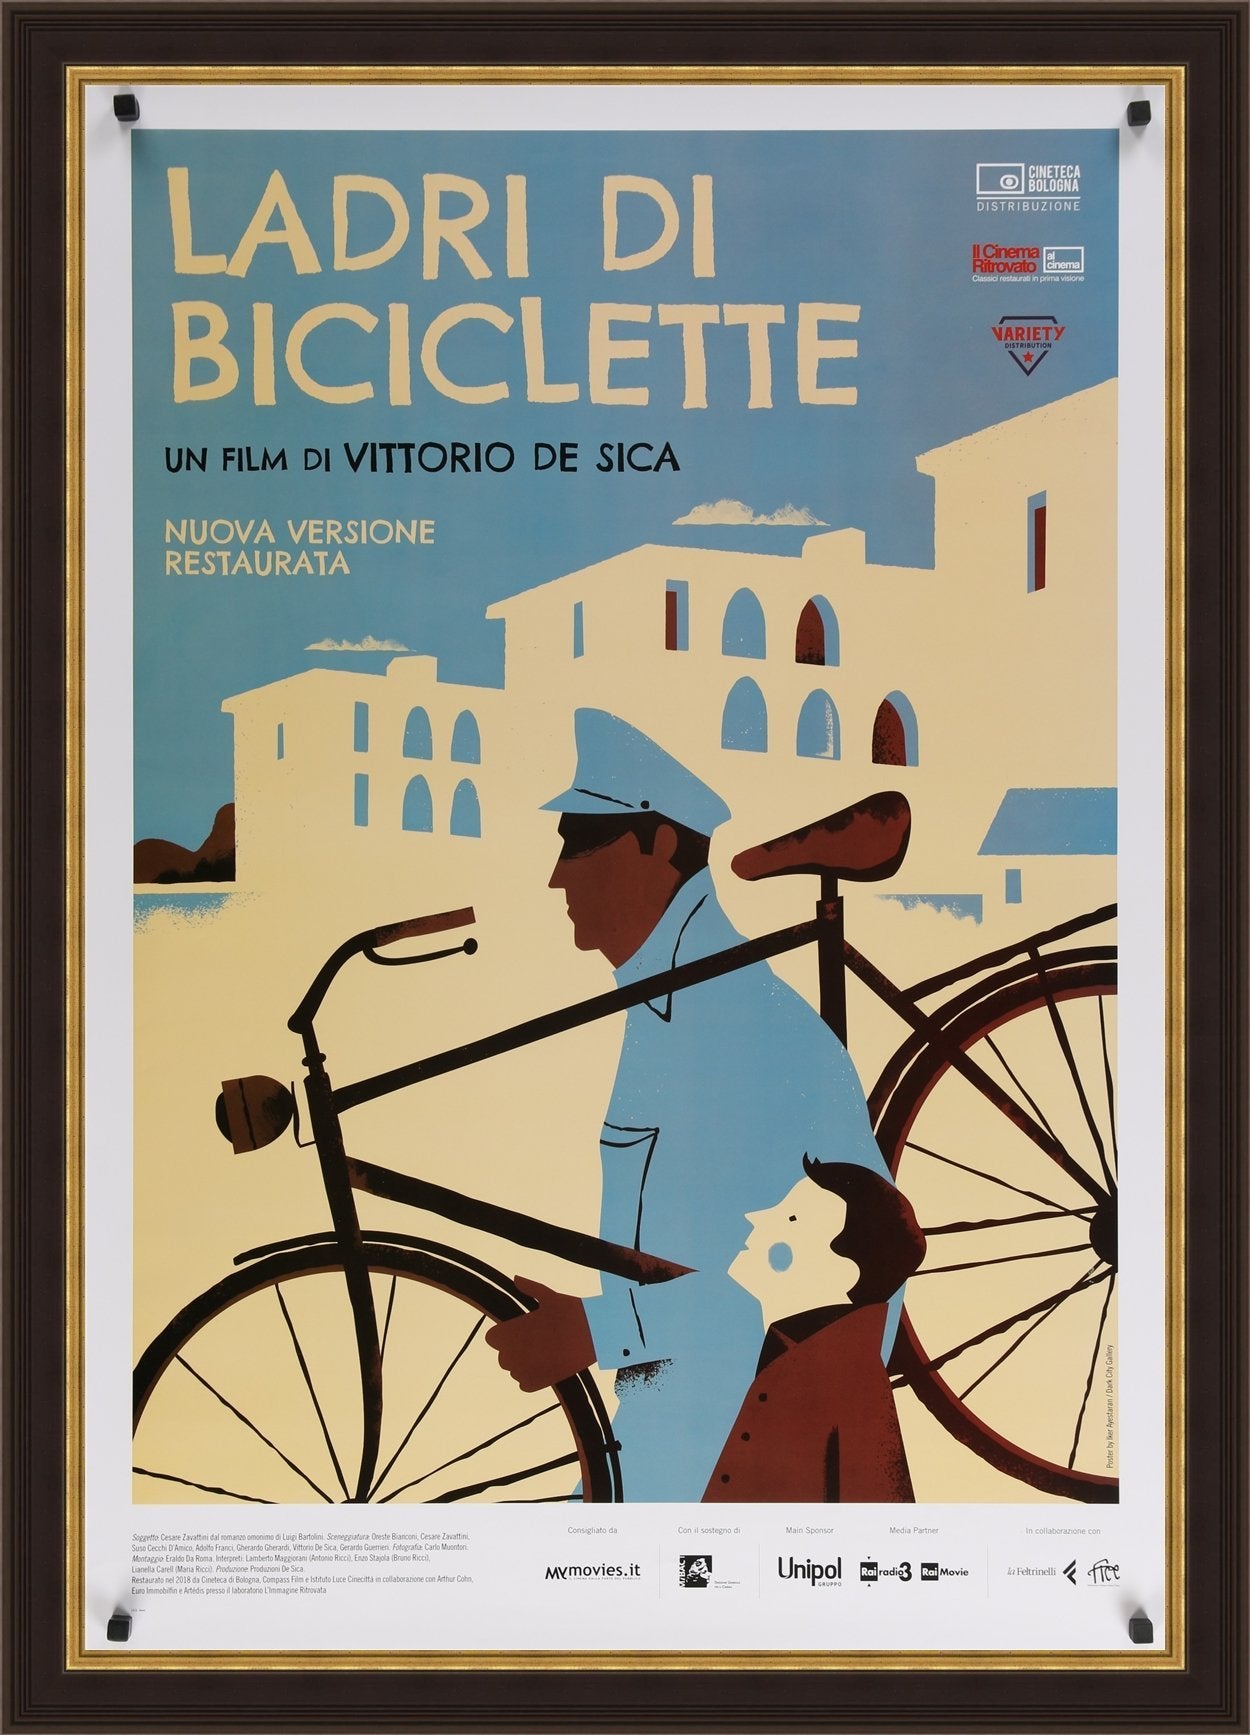 An original movie poster for the Italian film Ladri Di Biciclette / The Bicycle Thief